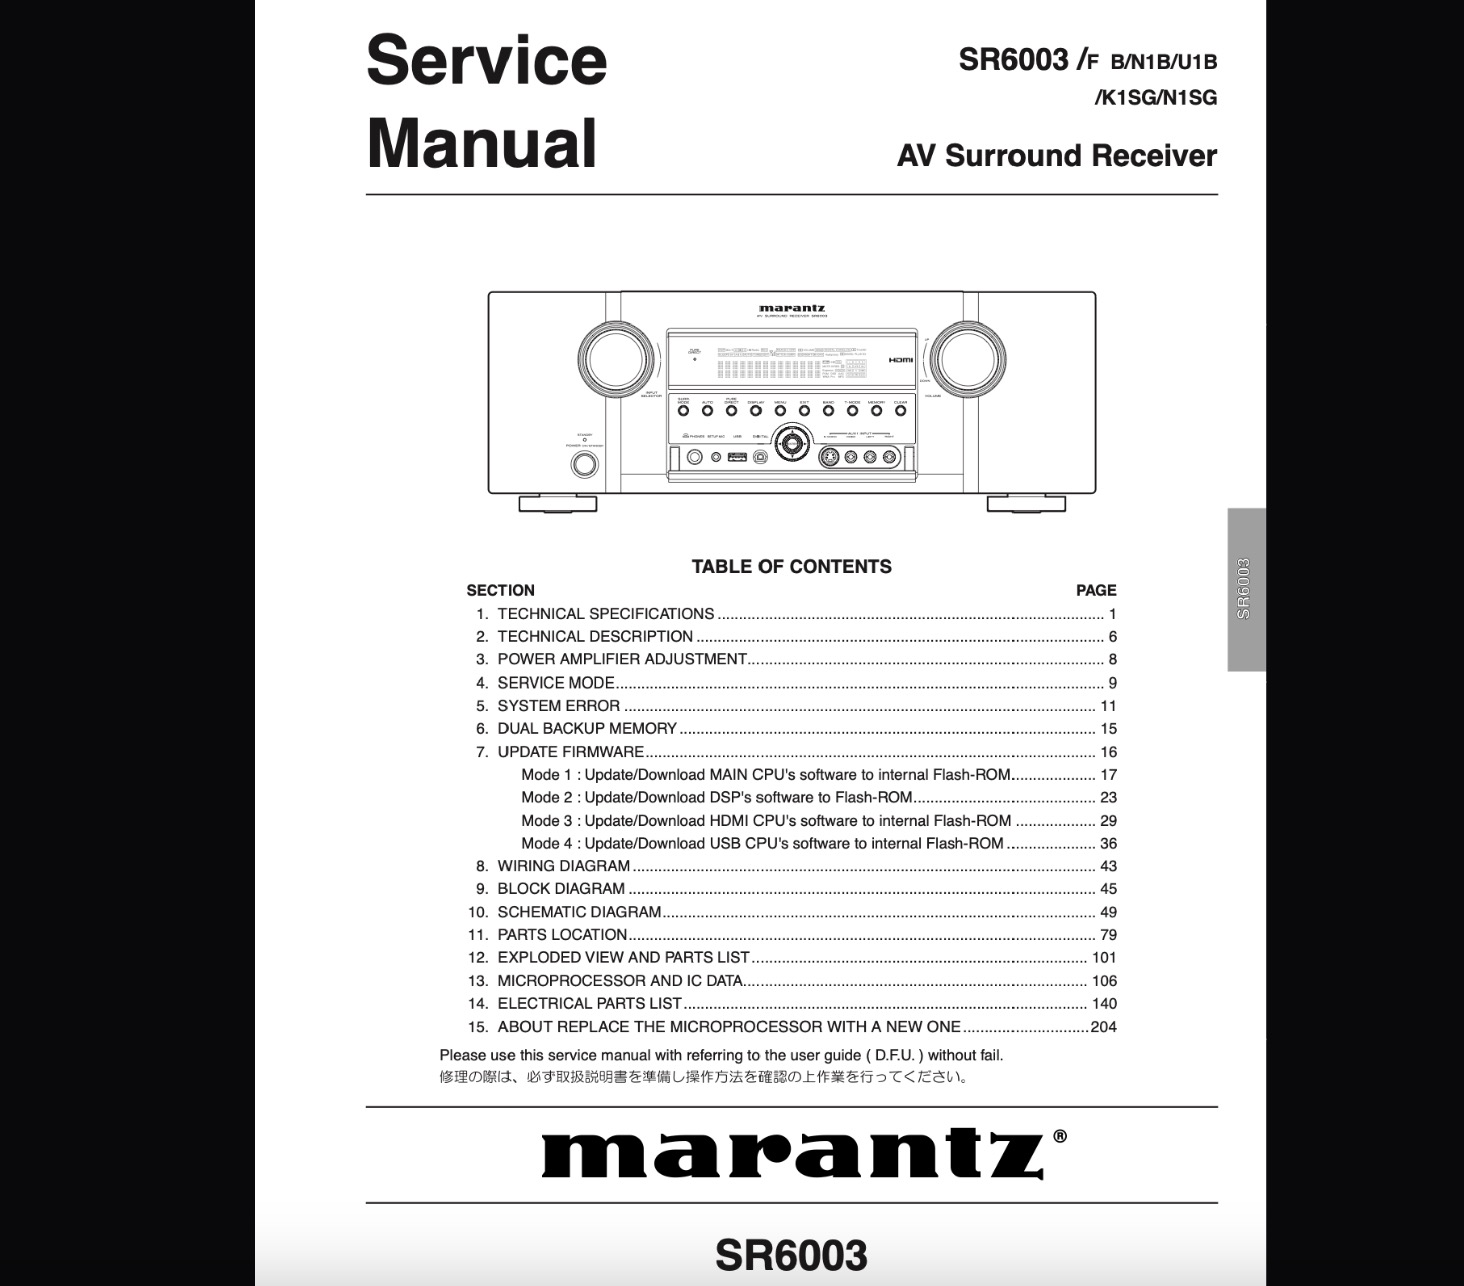 Marantz SR6003 AV Surround Receiver Service Manual, Parts List, Exploded View, Wiring and Schematic Diagram